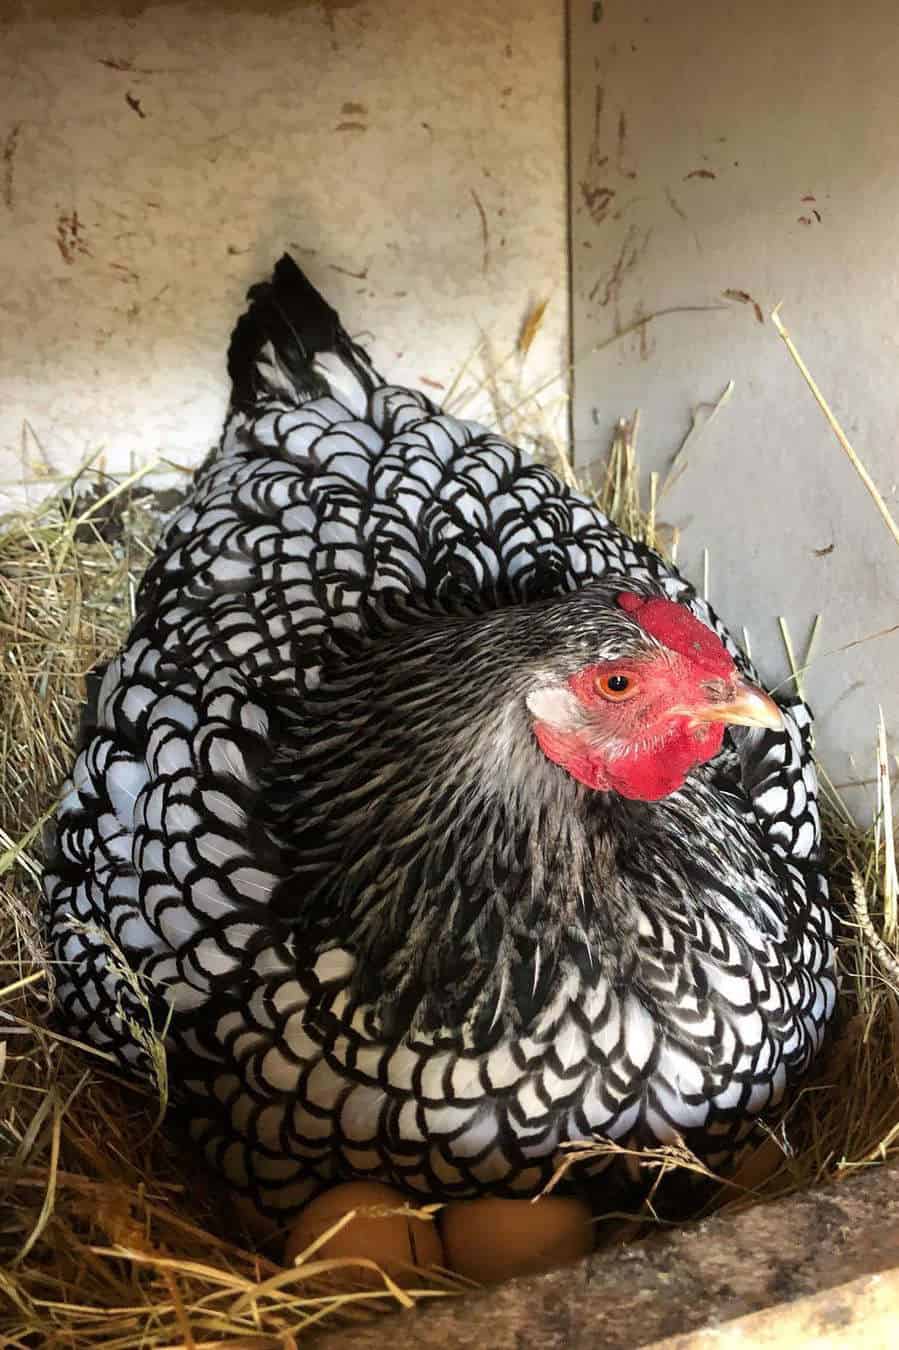 Silver Laced Wyandotte Egg Laying